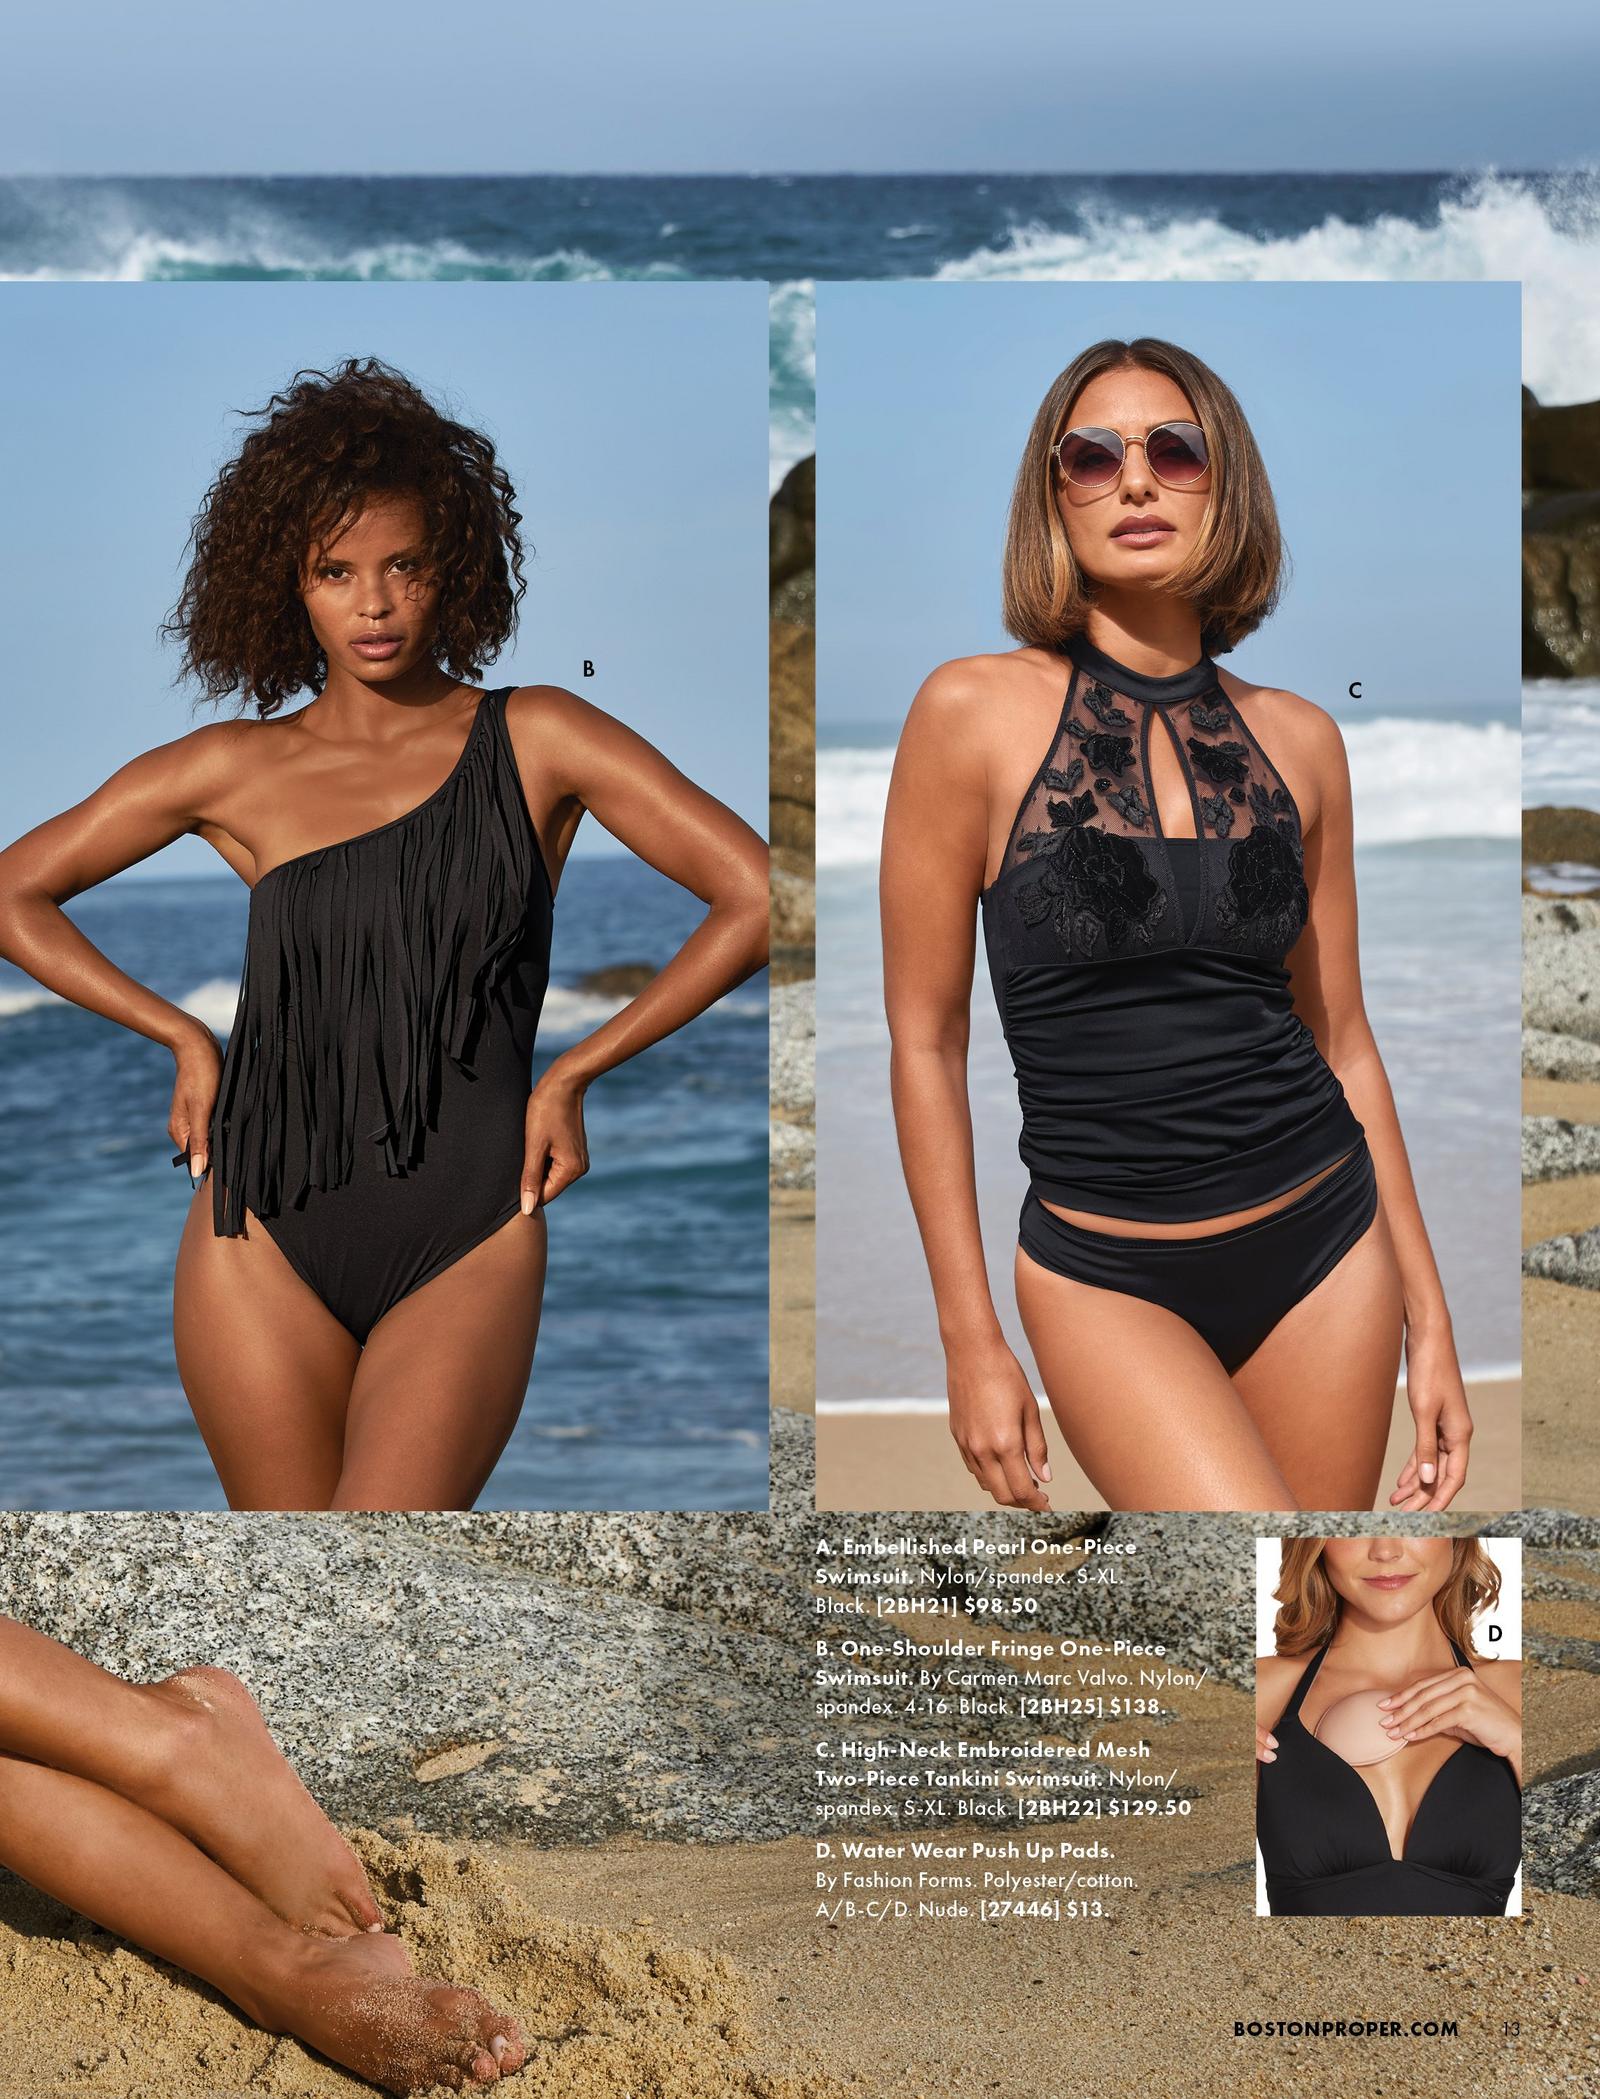 left model wearing a black one-shoulder fringe one-piece swimsuit. right model wearing a black floral lace tankini and sunglasses. bottom left shows water pads.